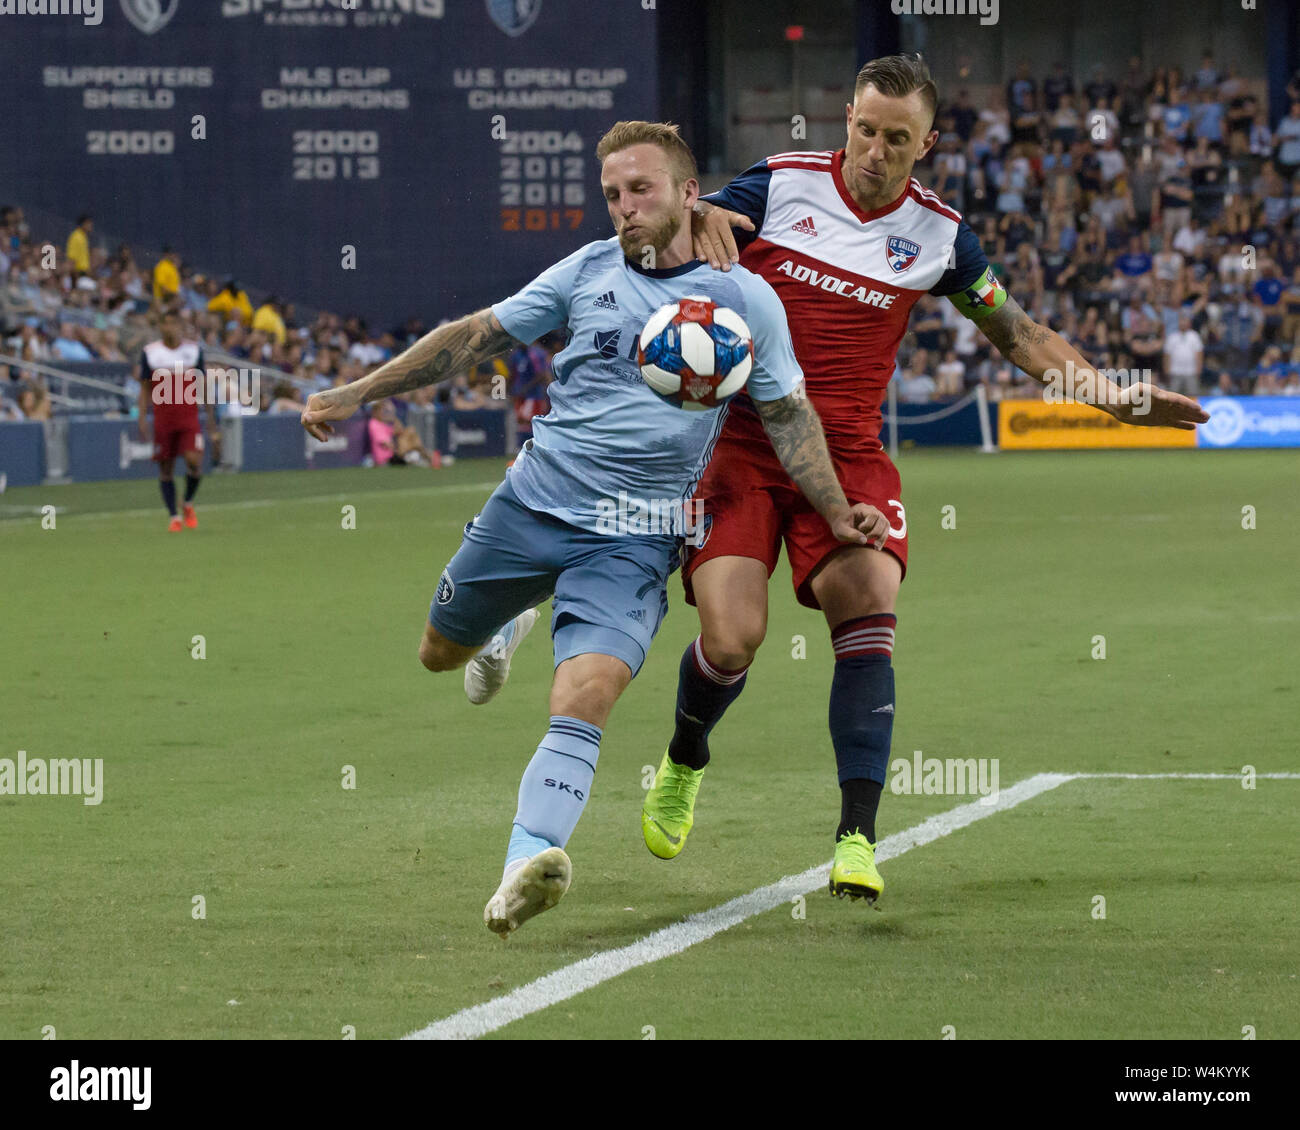 Kansas City, Kansas, USA. 20th July, 2019. Sporting KC forward Johnny Russell #7 (l) is on offense against FC Dallas defender Reto Ziegler #3 (r) during the 2nd half of the game. Credit: Serena S.Y. Hsu/ZUMA Wire/Alamy Live News Stock Photo